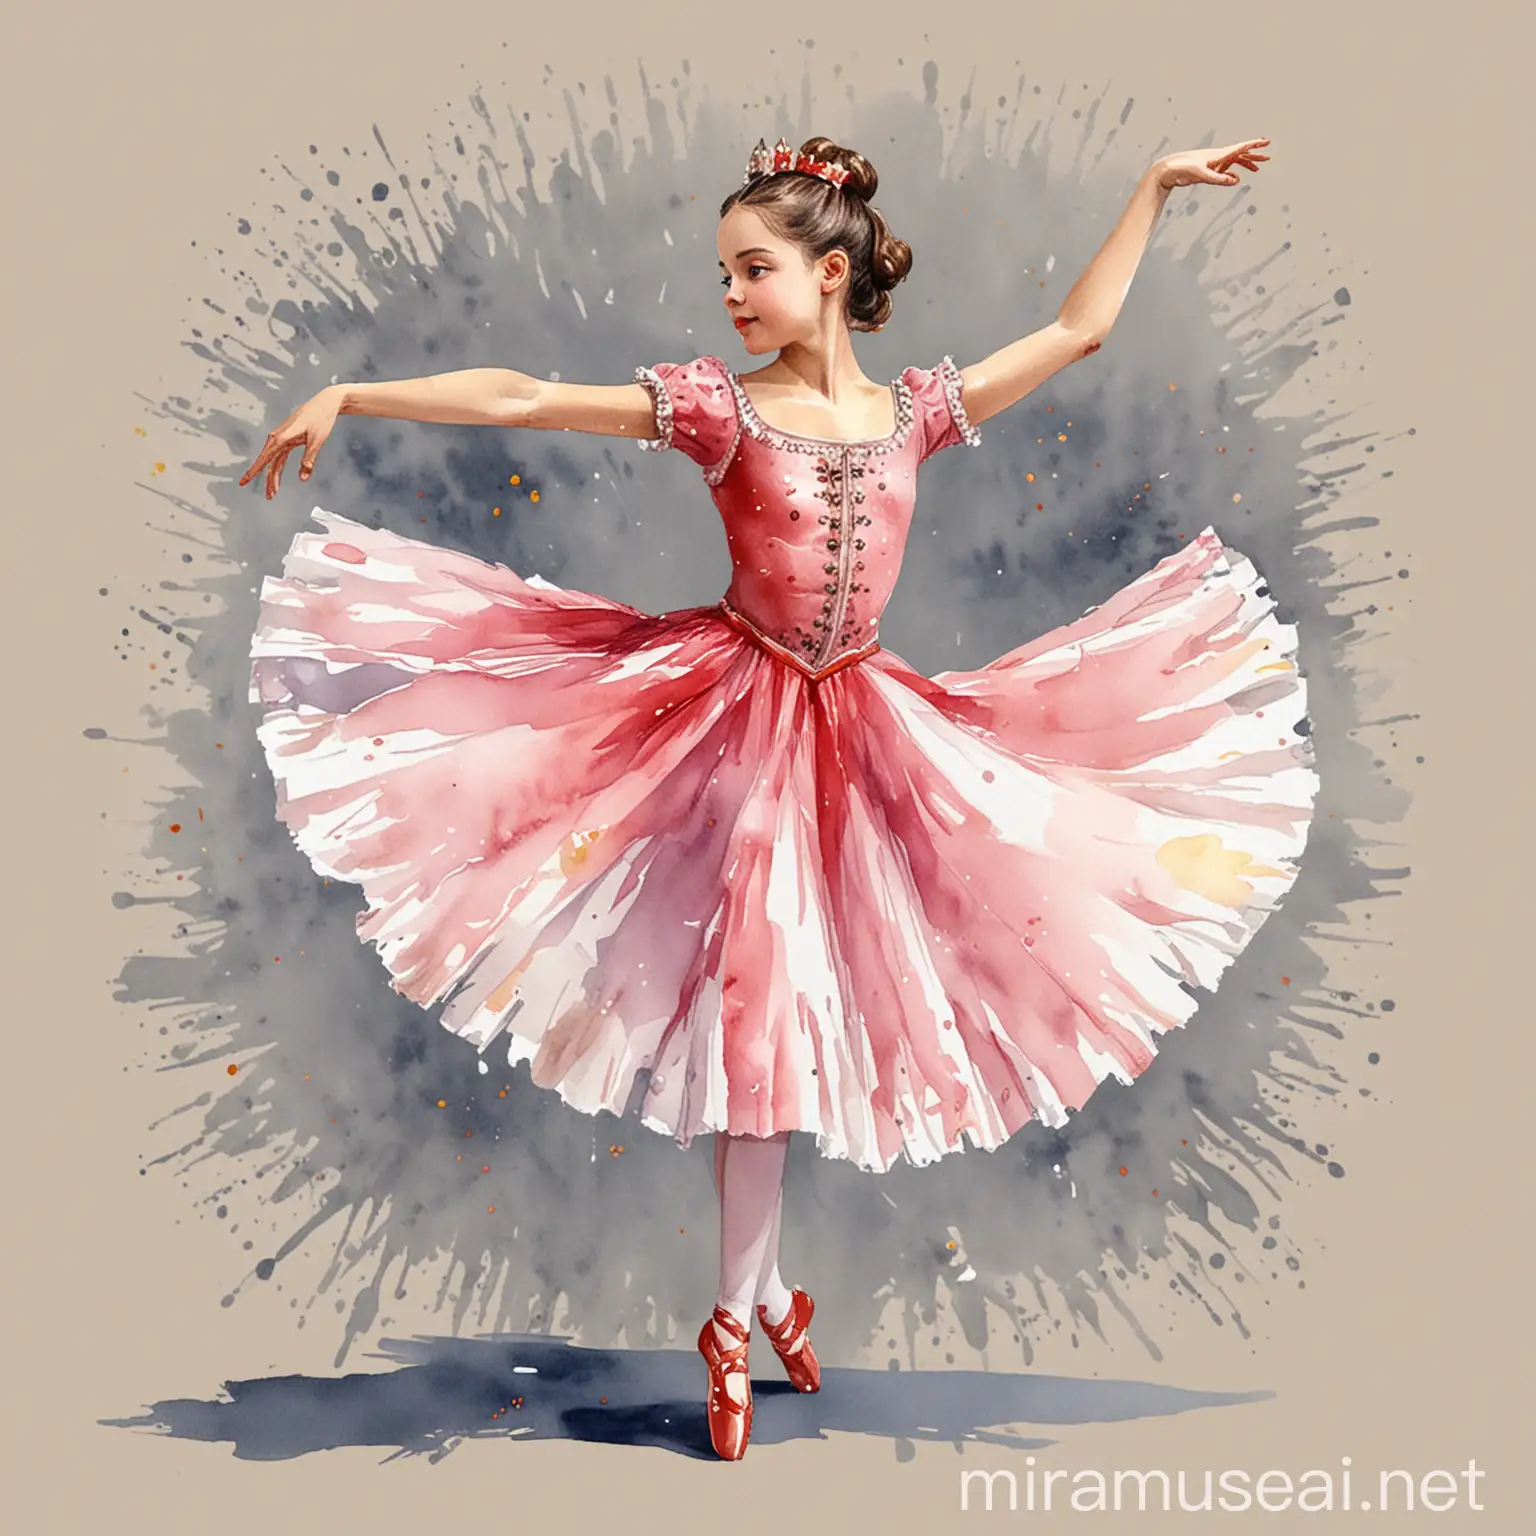 Watercolor Drawing of a Girl Dancing as the Nutcracker for Children